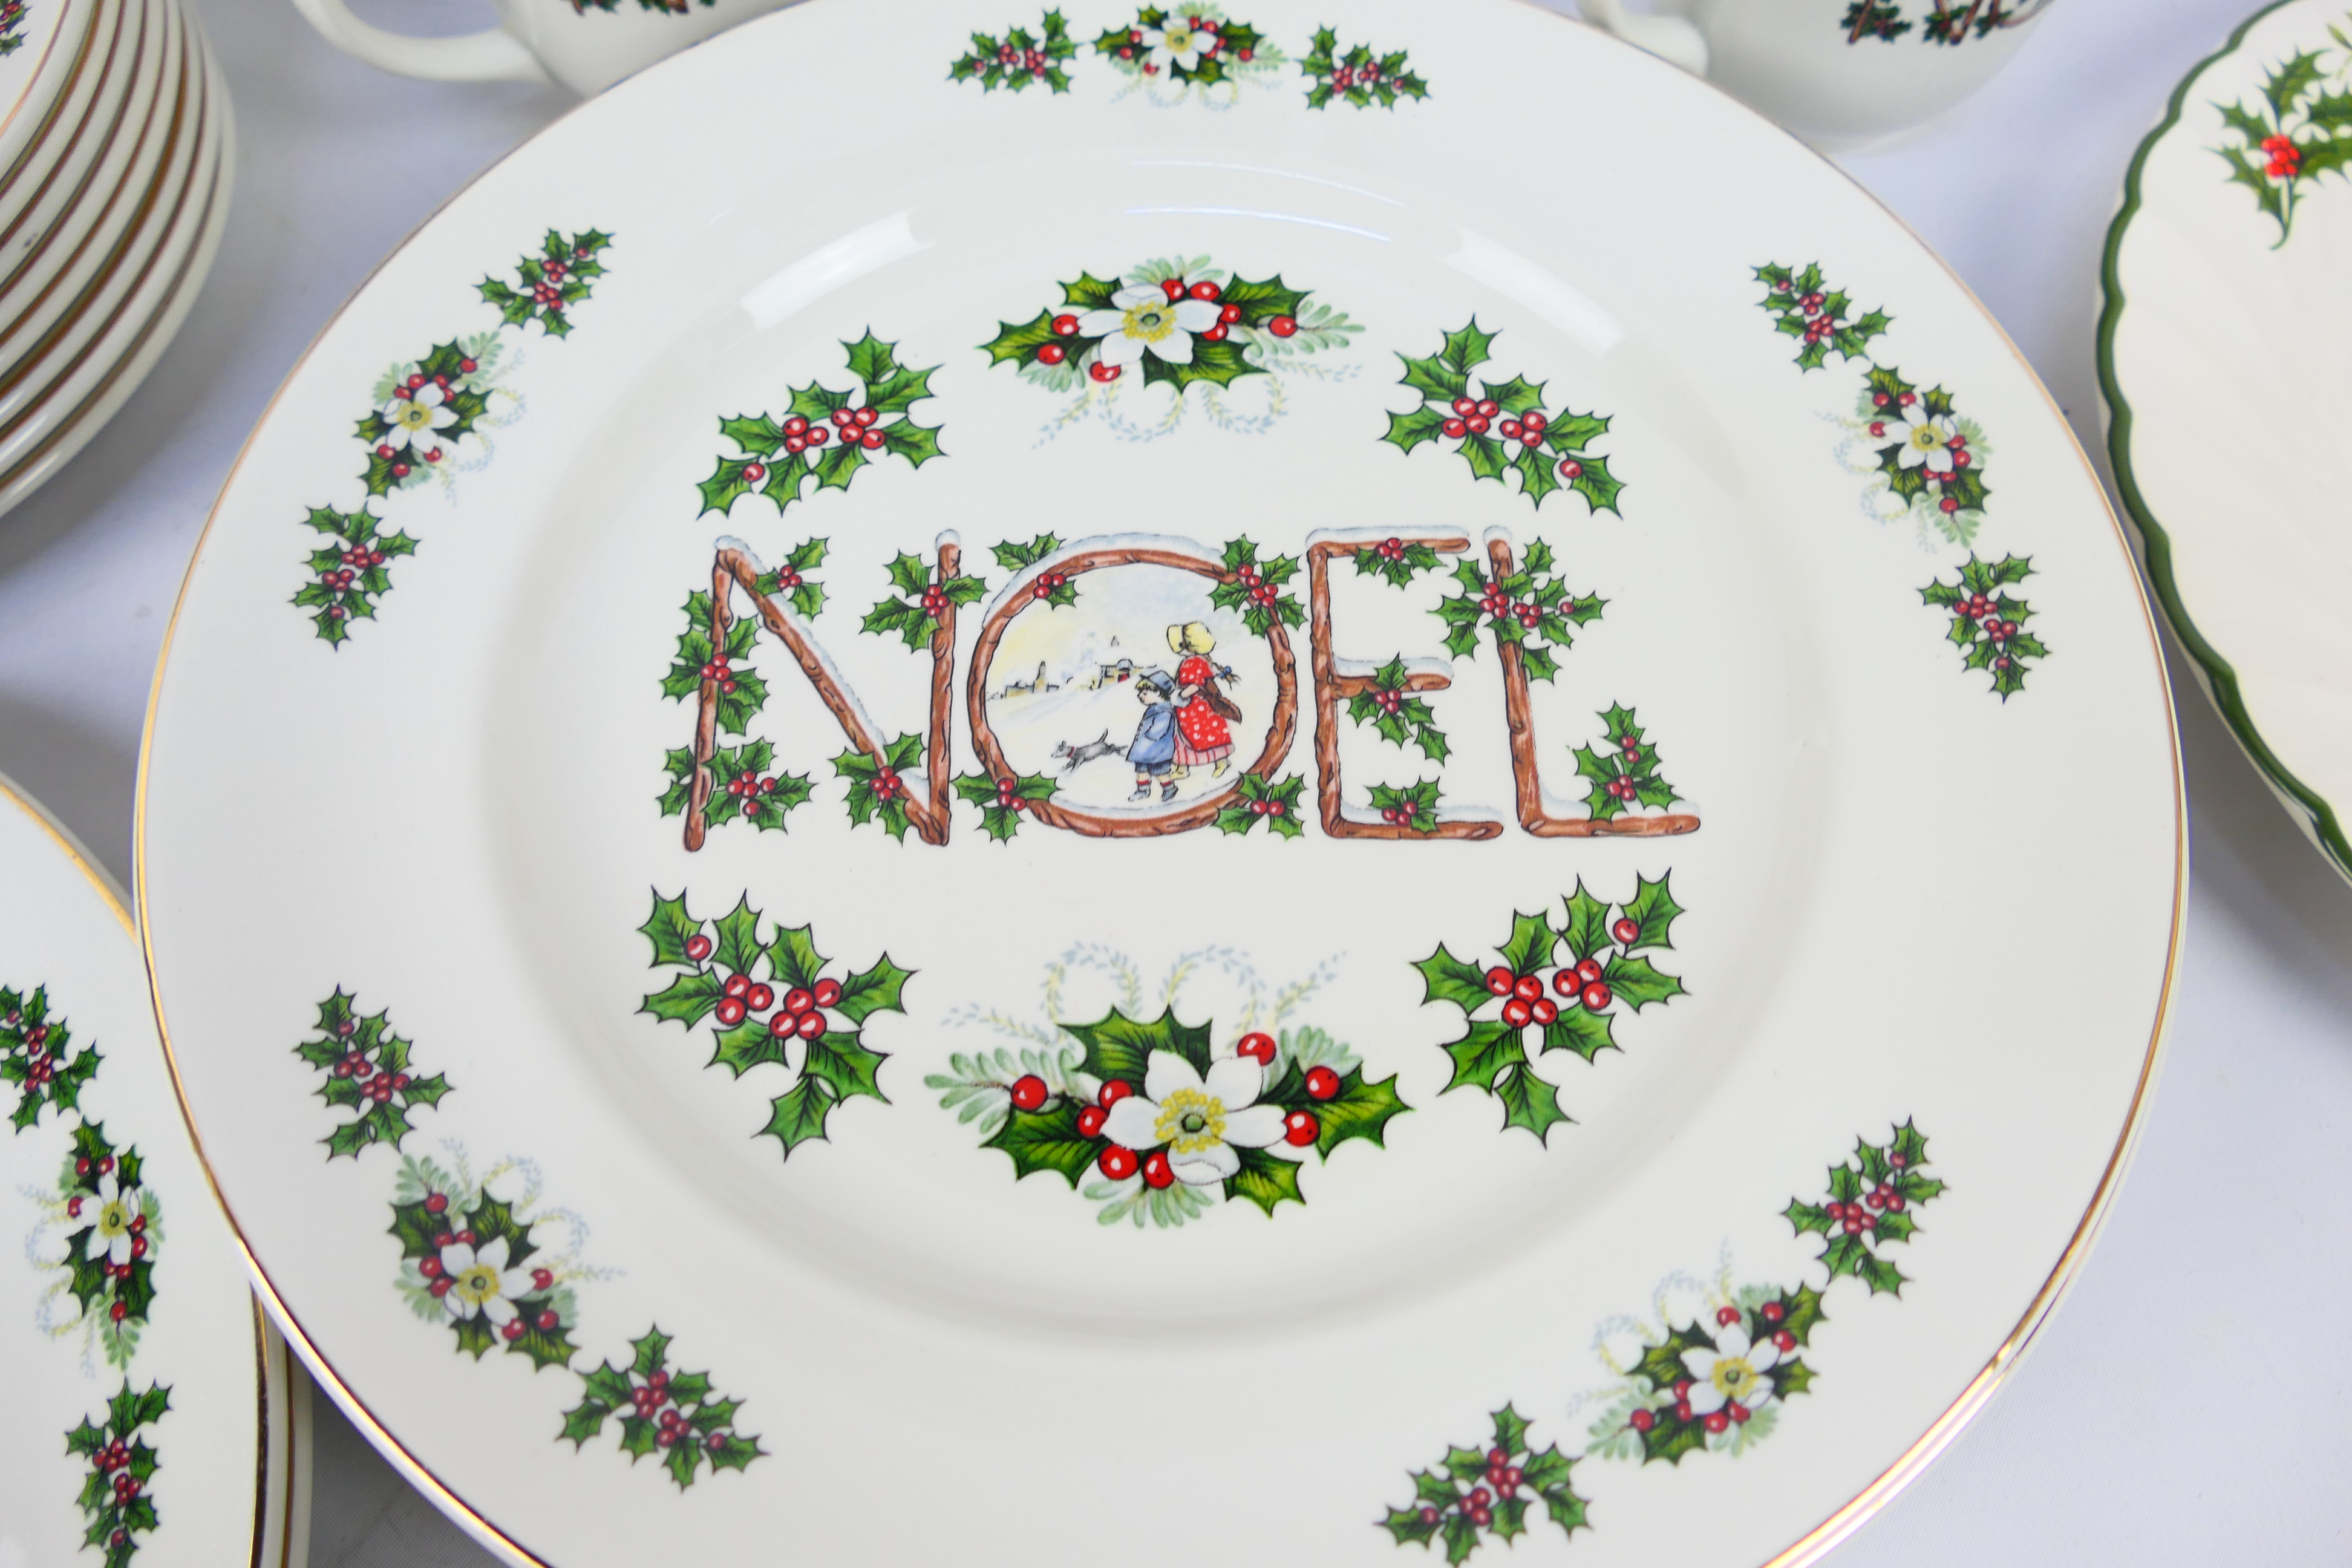 Noel By Wood and Sons, Baratts - A Noel ceramic tea service with holly patterns - Lot includes cups, - Image 5 of 7